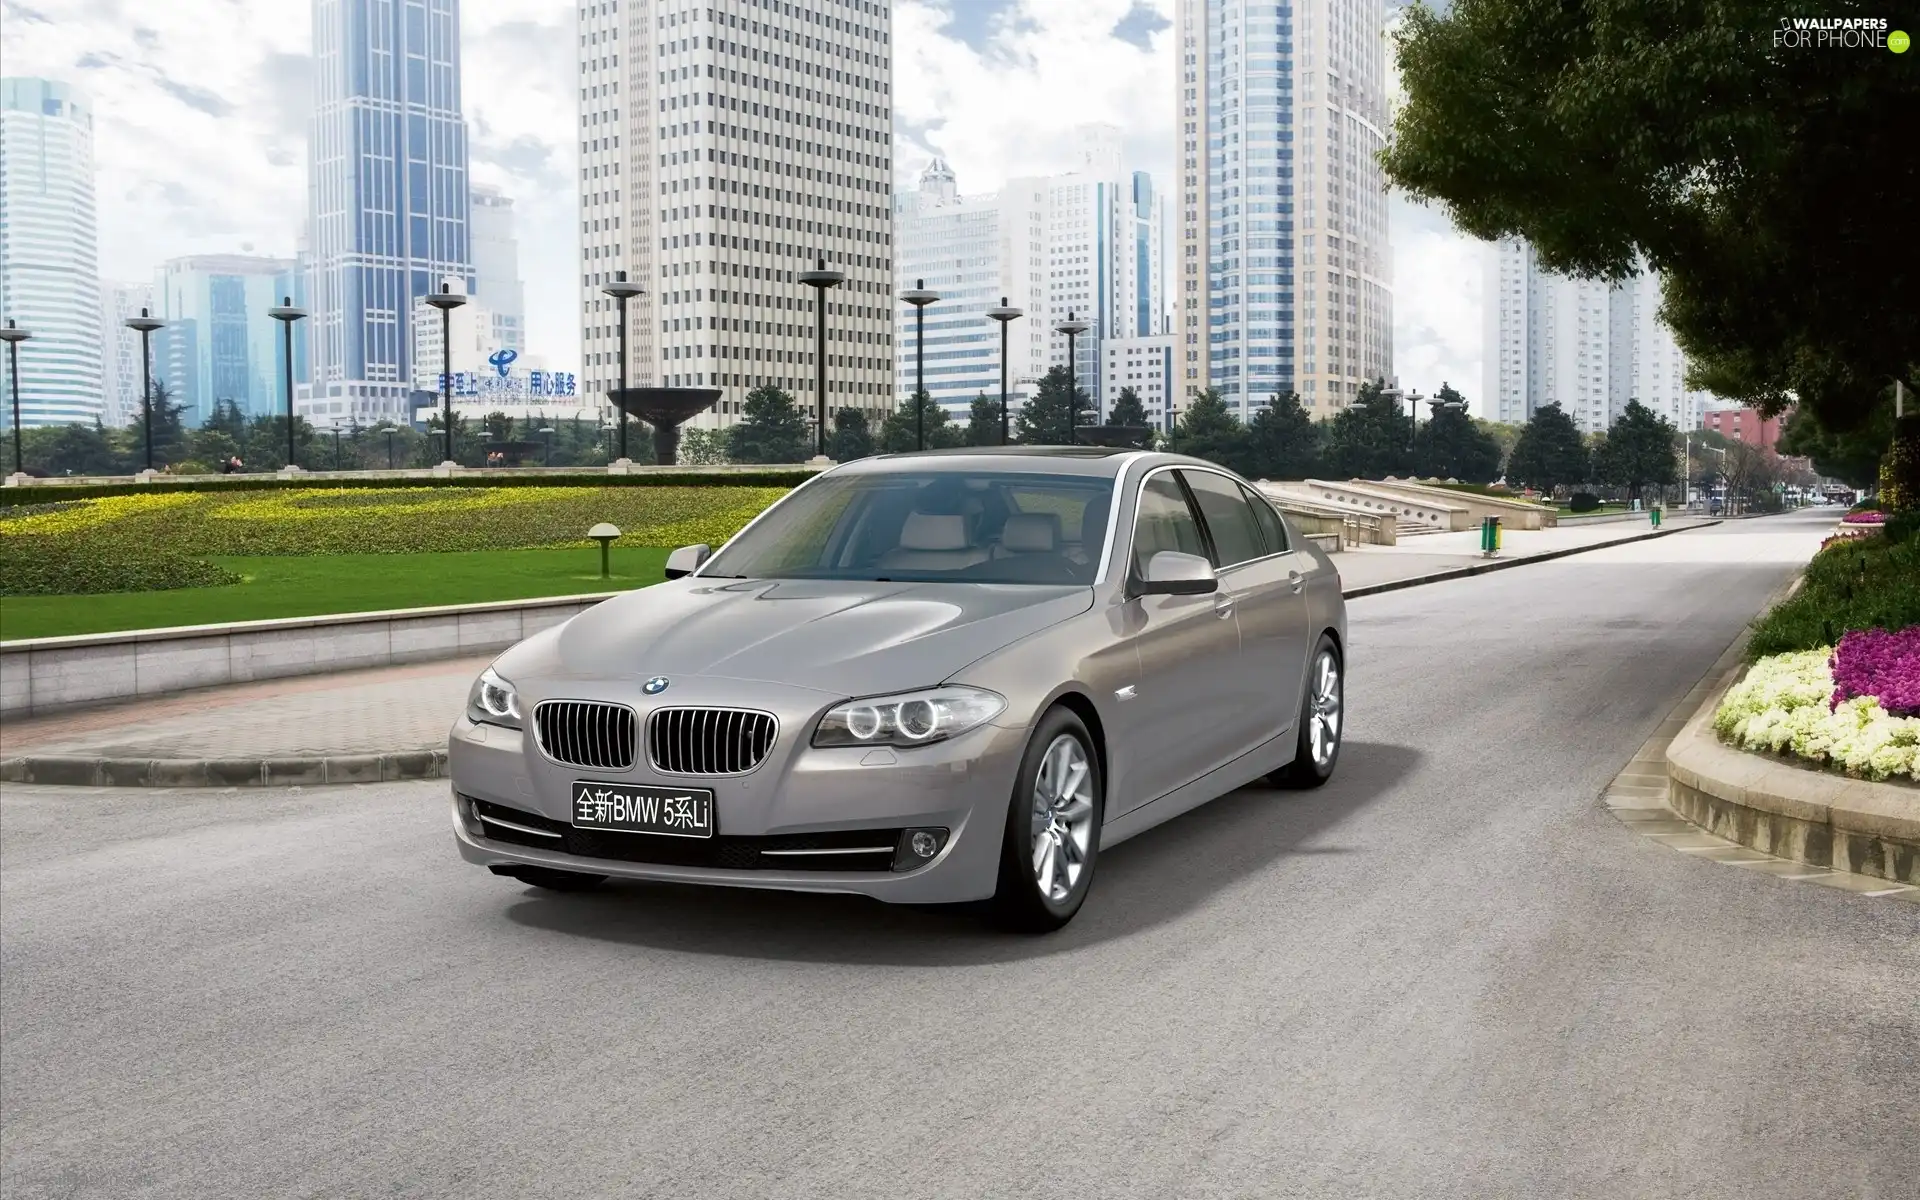 BMW 5 Series, Way, buildings, The F-10